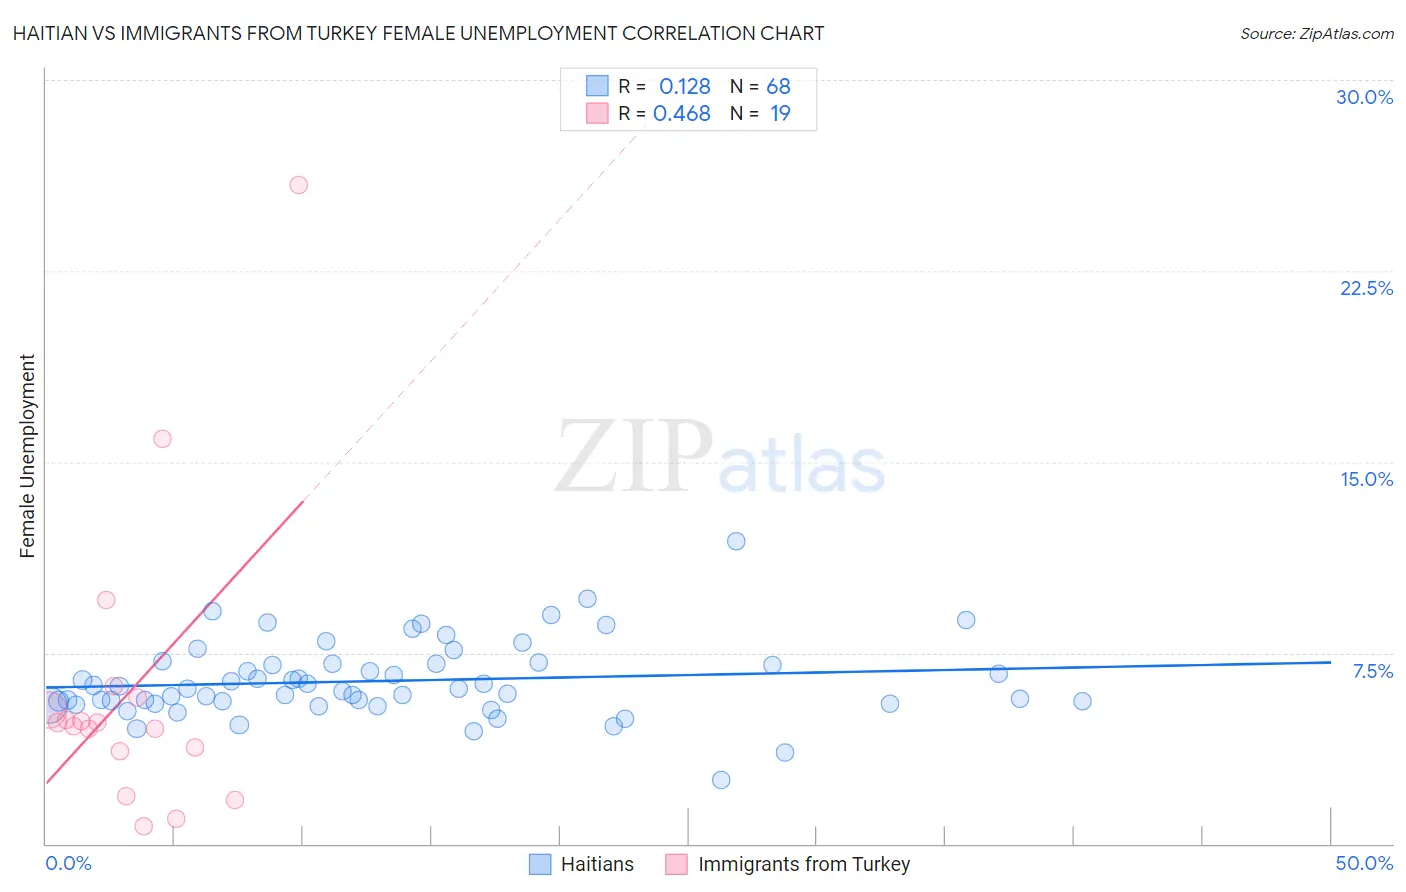 Haitian vs Immigrants from Turkey Female Unemployment